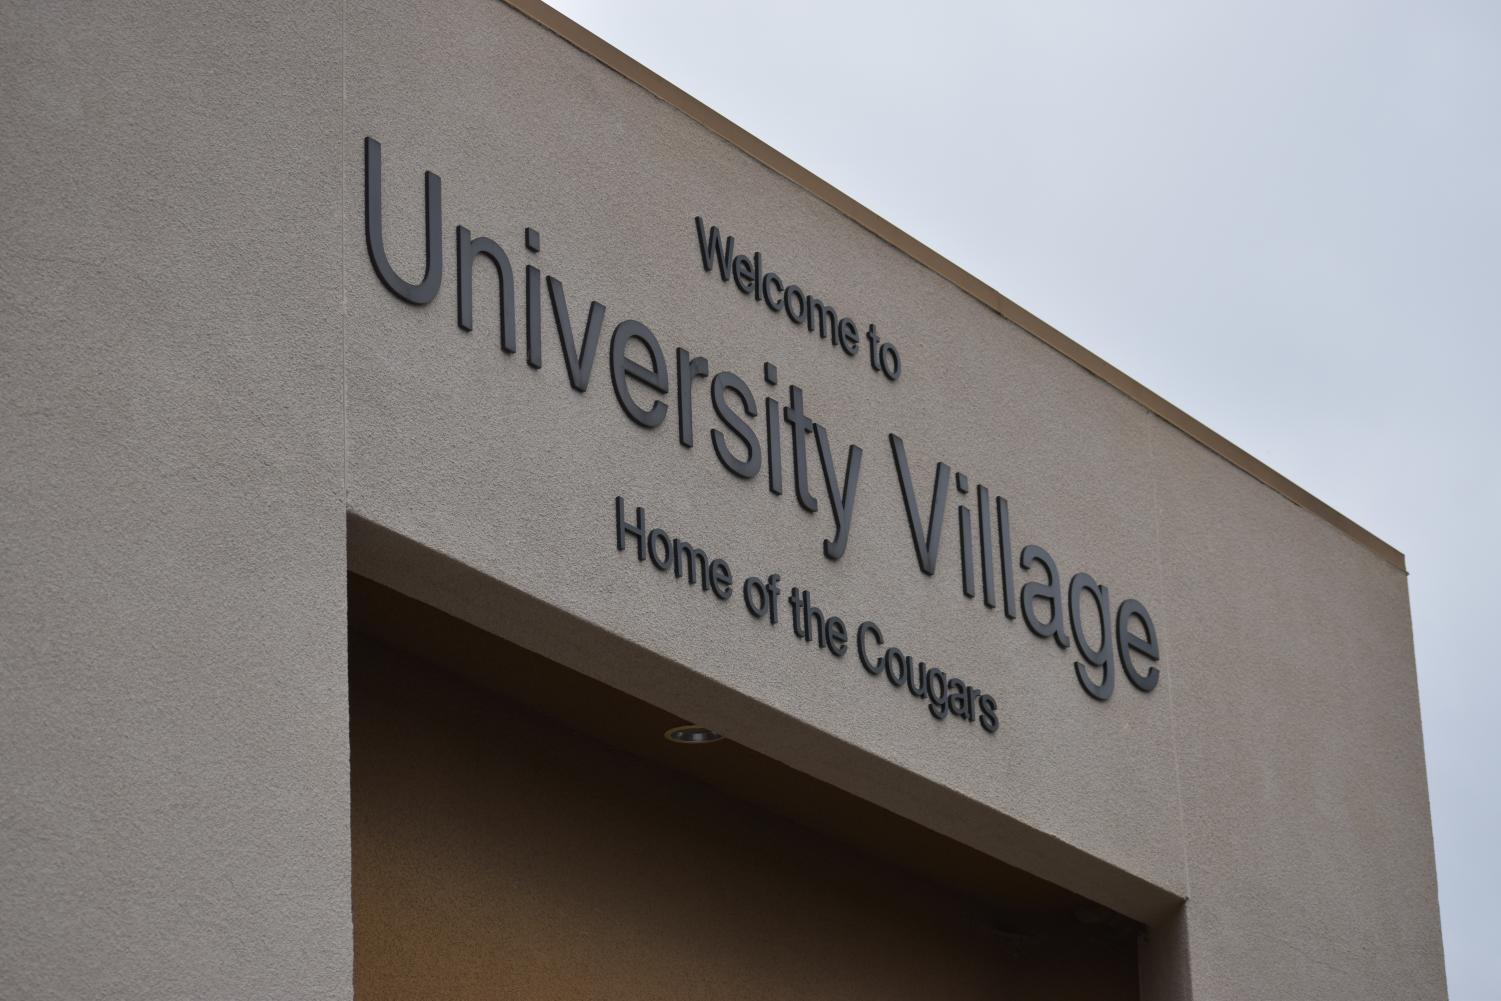 CSUSM housing 1,500 residents to the UVA and QUAD for the